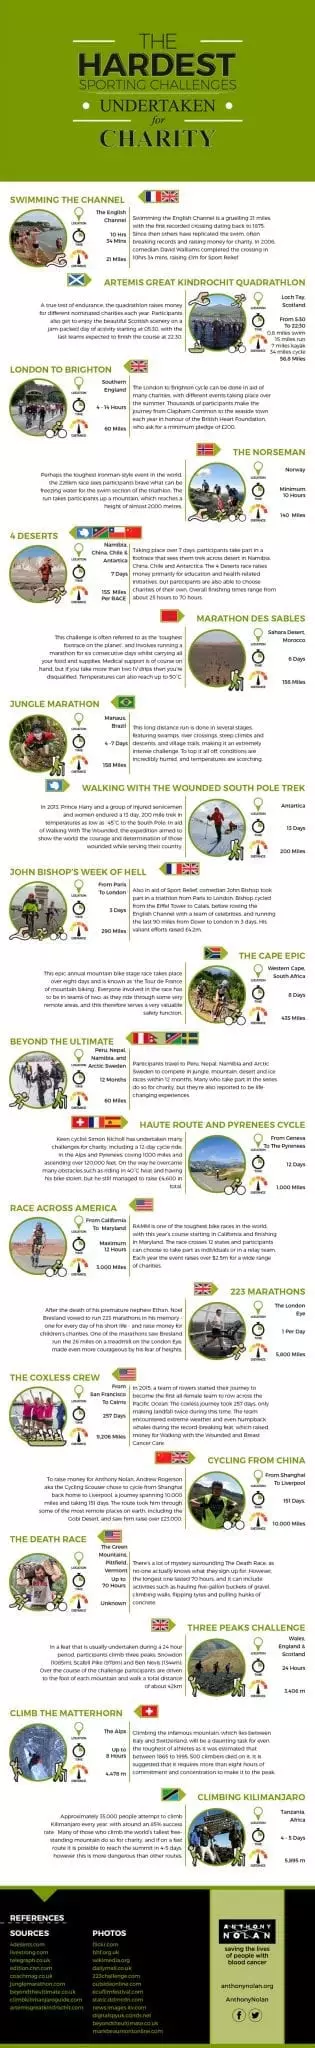 The hardest sporting challenges - by Anthony Nolan. Click to enlarge